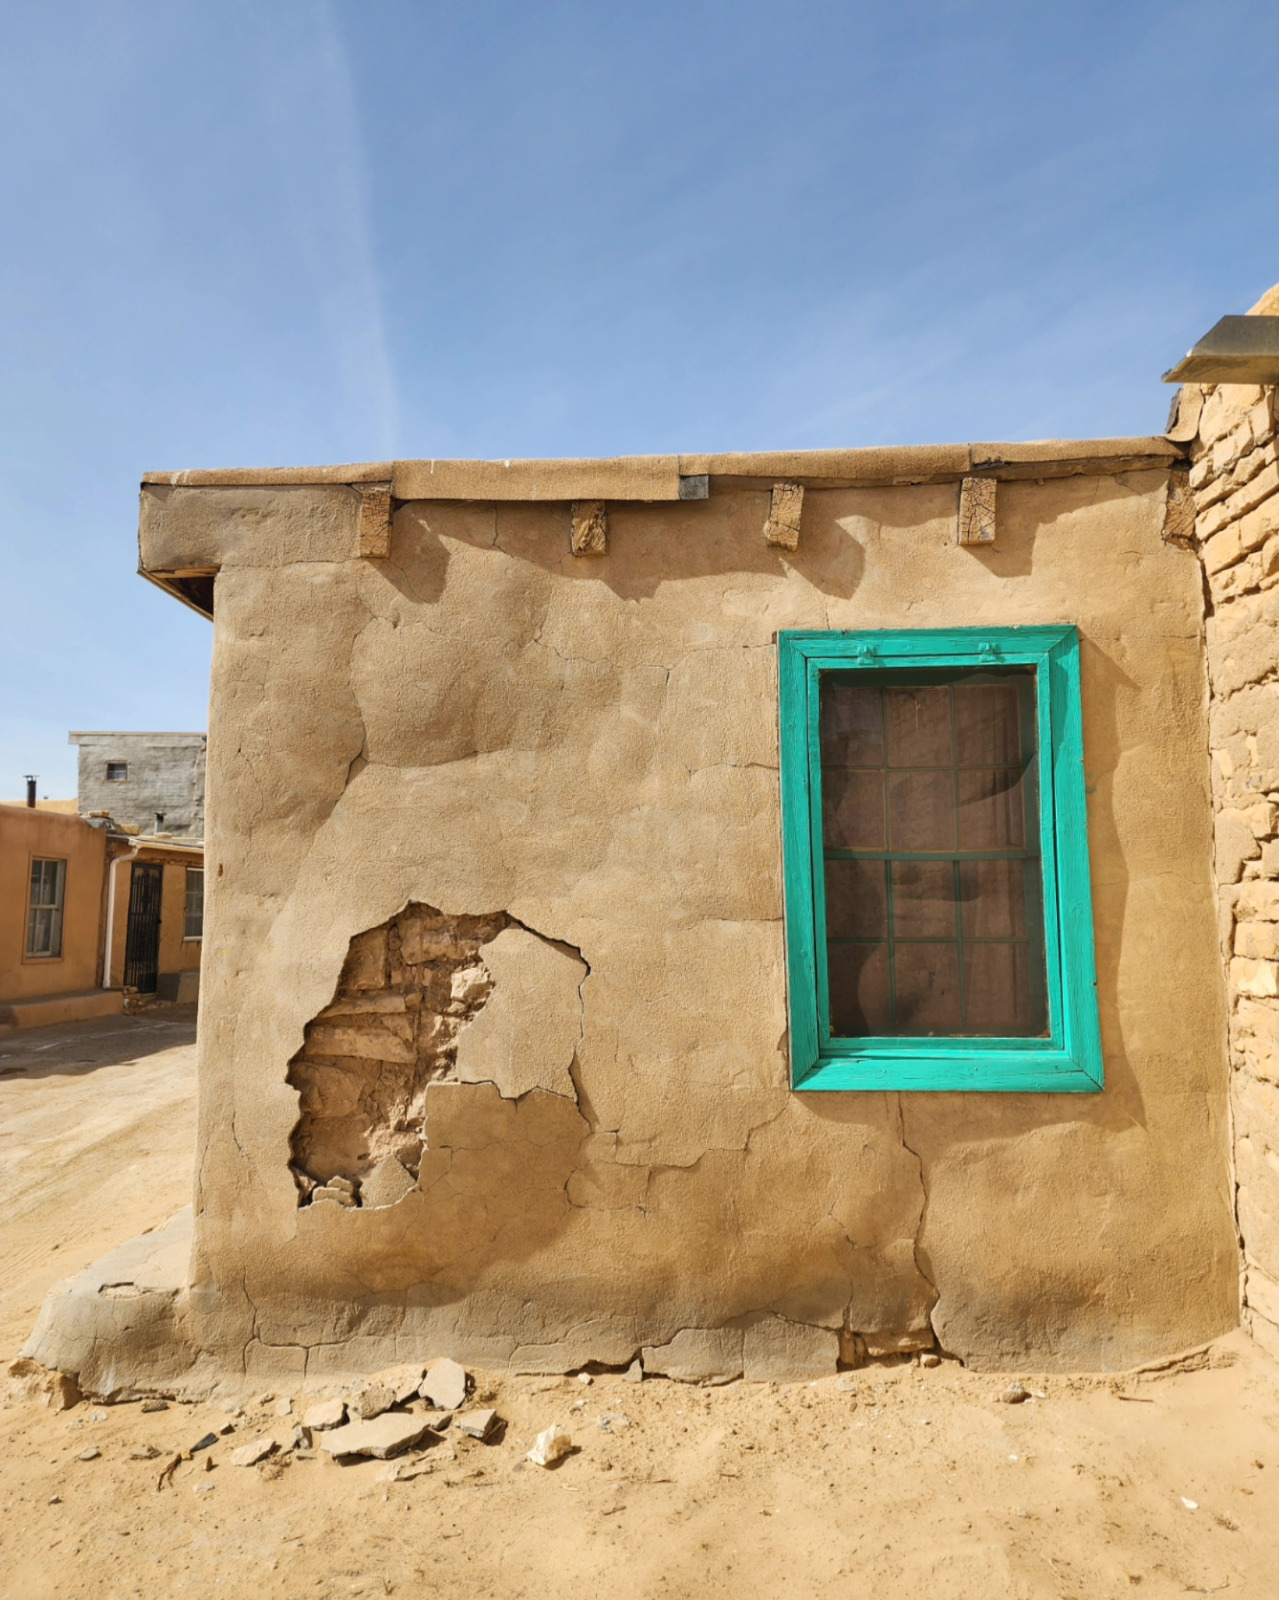 Turquoise window frame on an adobe brick building in Acoma Pueblo.